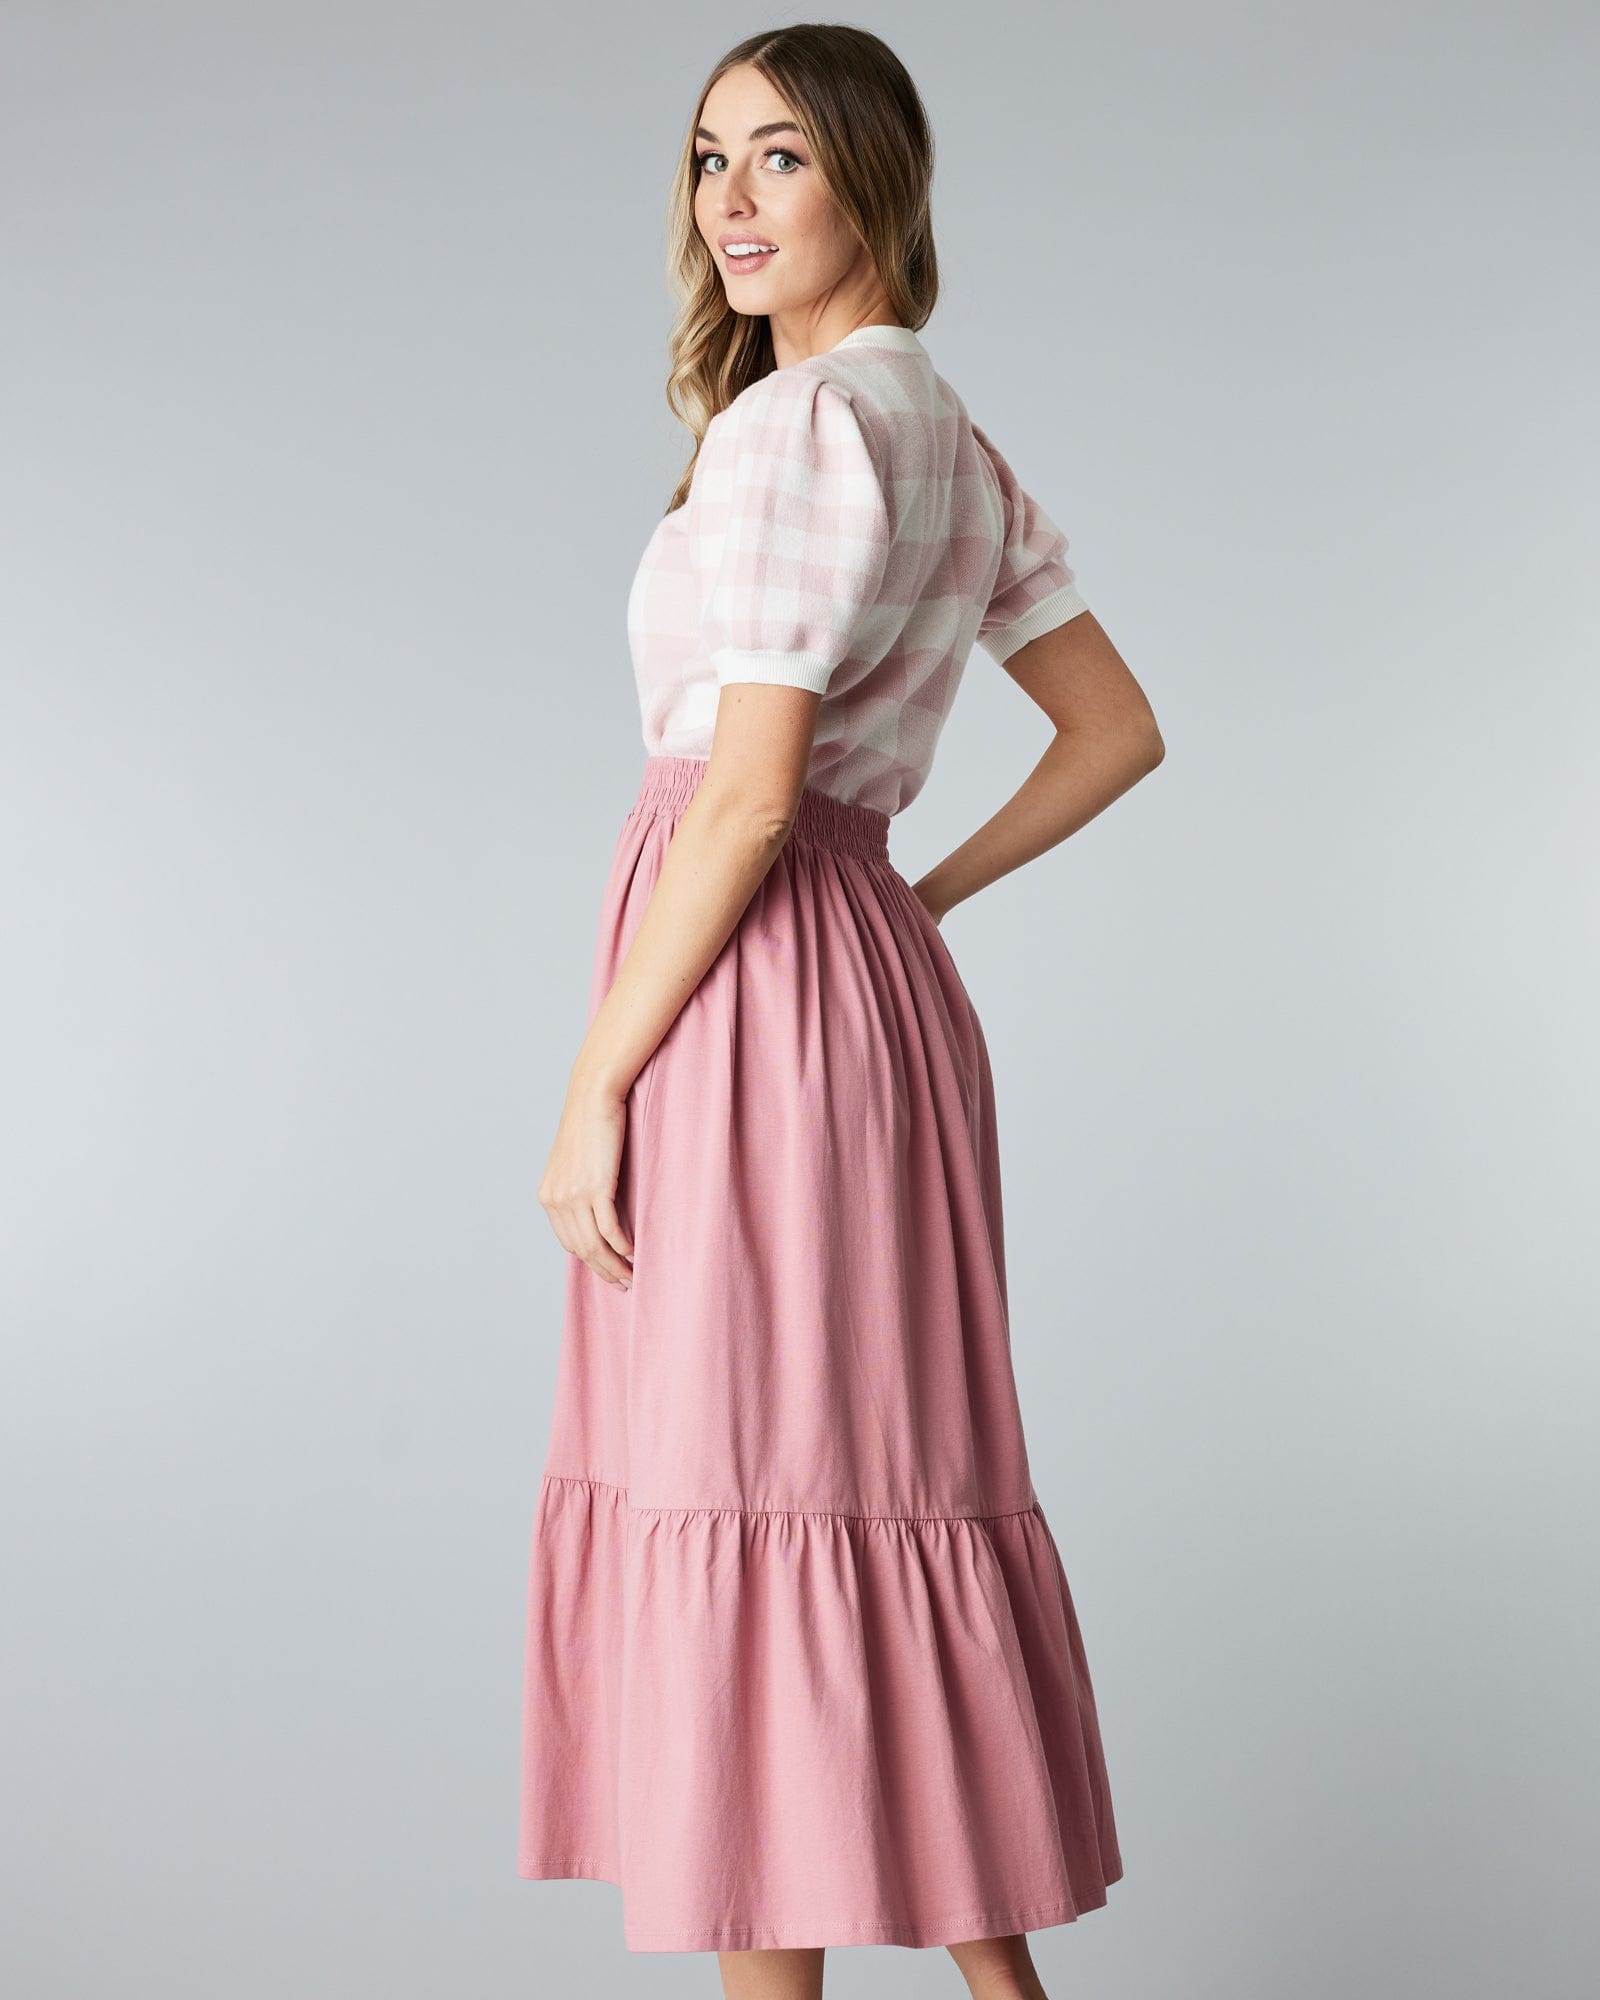 Woman in a pink, tiered, midi skirt